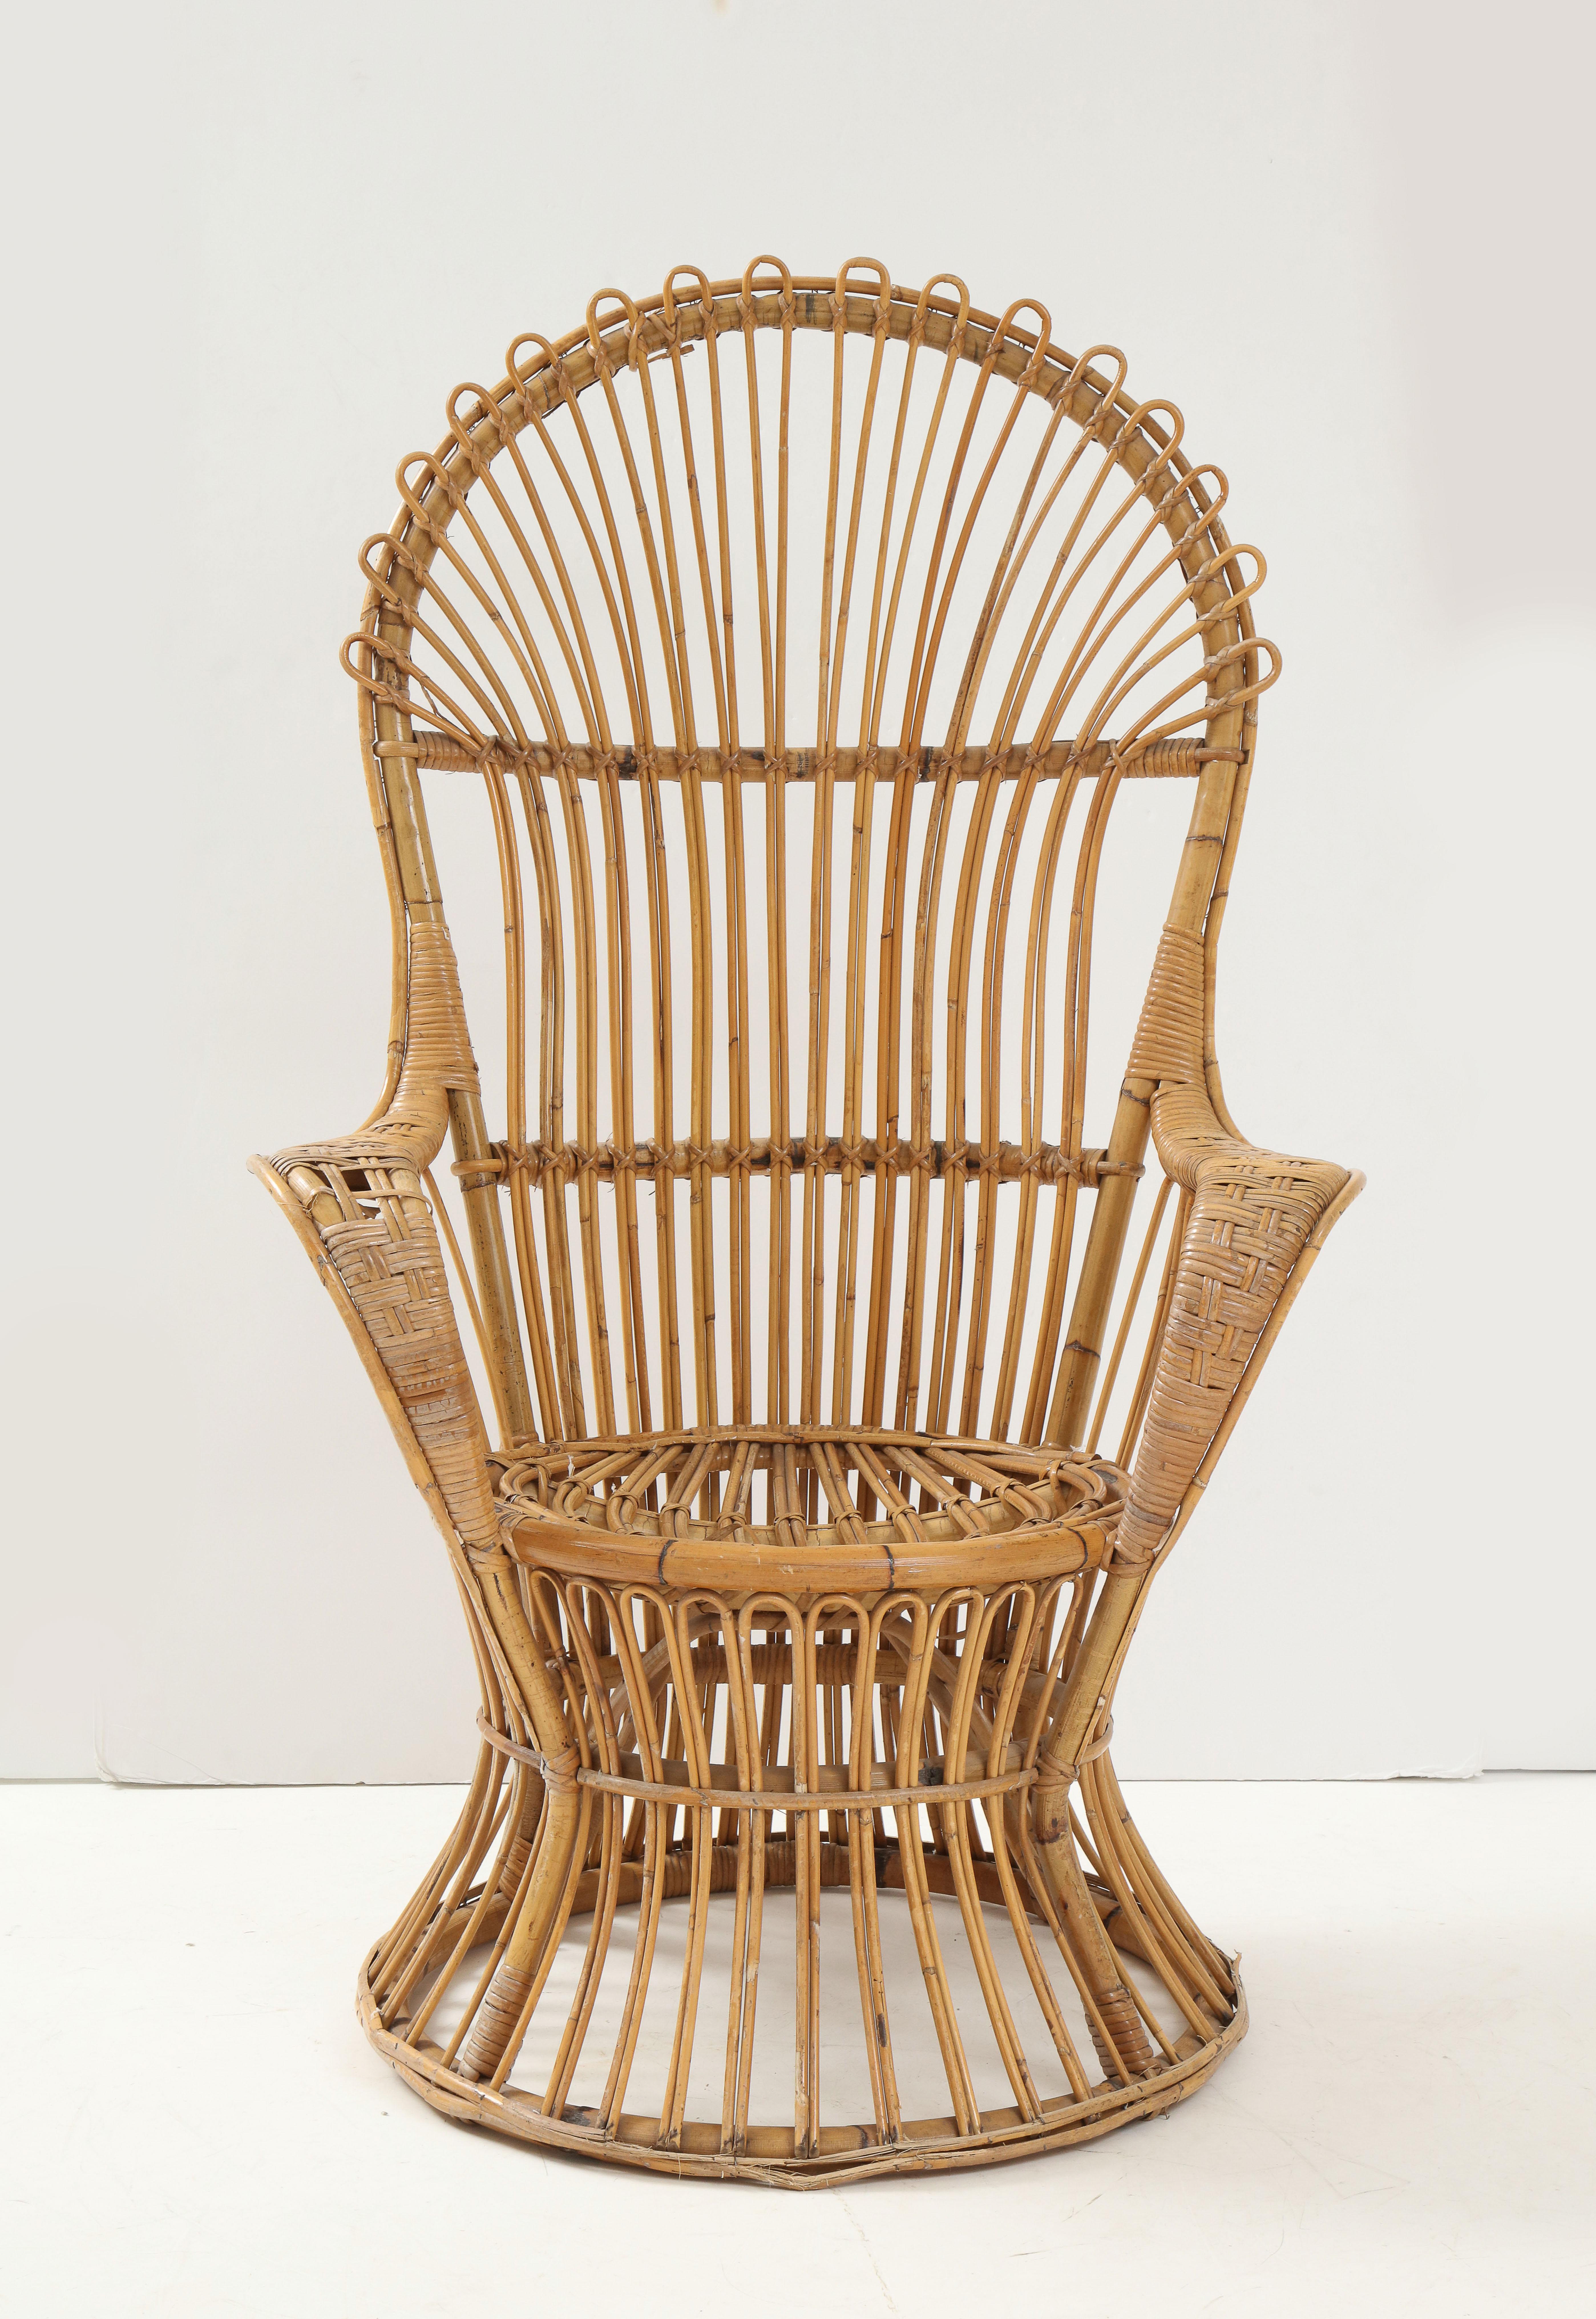 An Italian high-back bamboo and rattan armchair designed by Lio Carminati. Dramatic and sculptural this would add an interesting element to any interior! 
The Italian architect Gio Ponti included this model for the furnishing of the ocean liner,